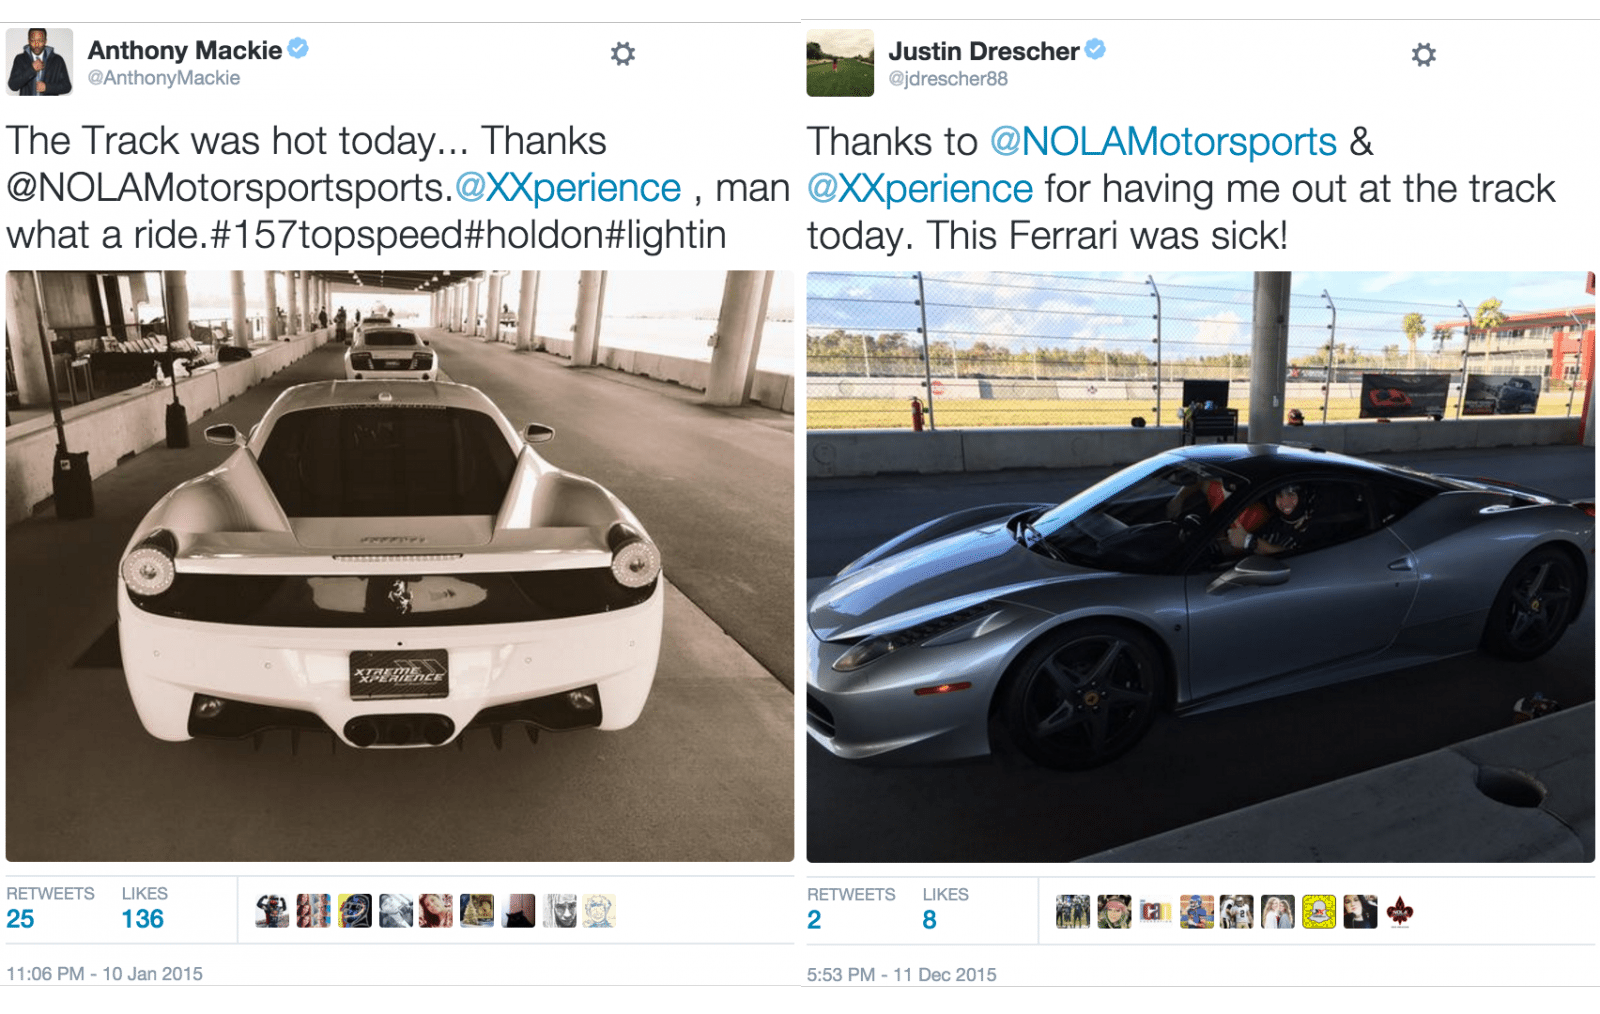 Image Tweets from the track by Anthony Mackie and Justin Drescher with xtreme xperience